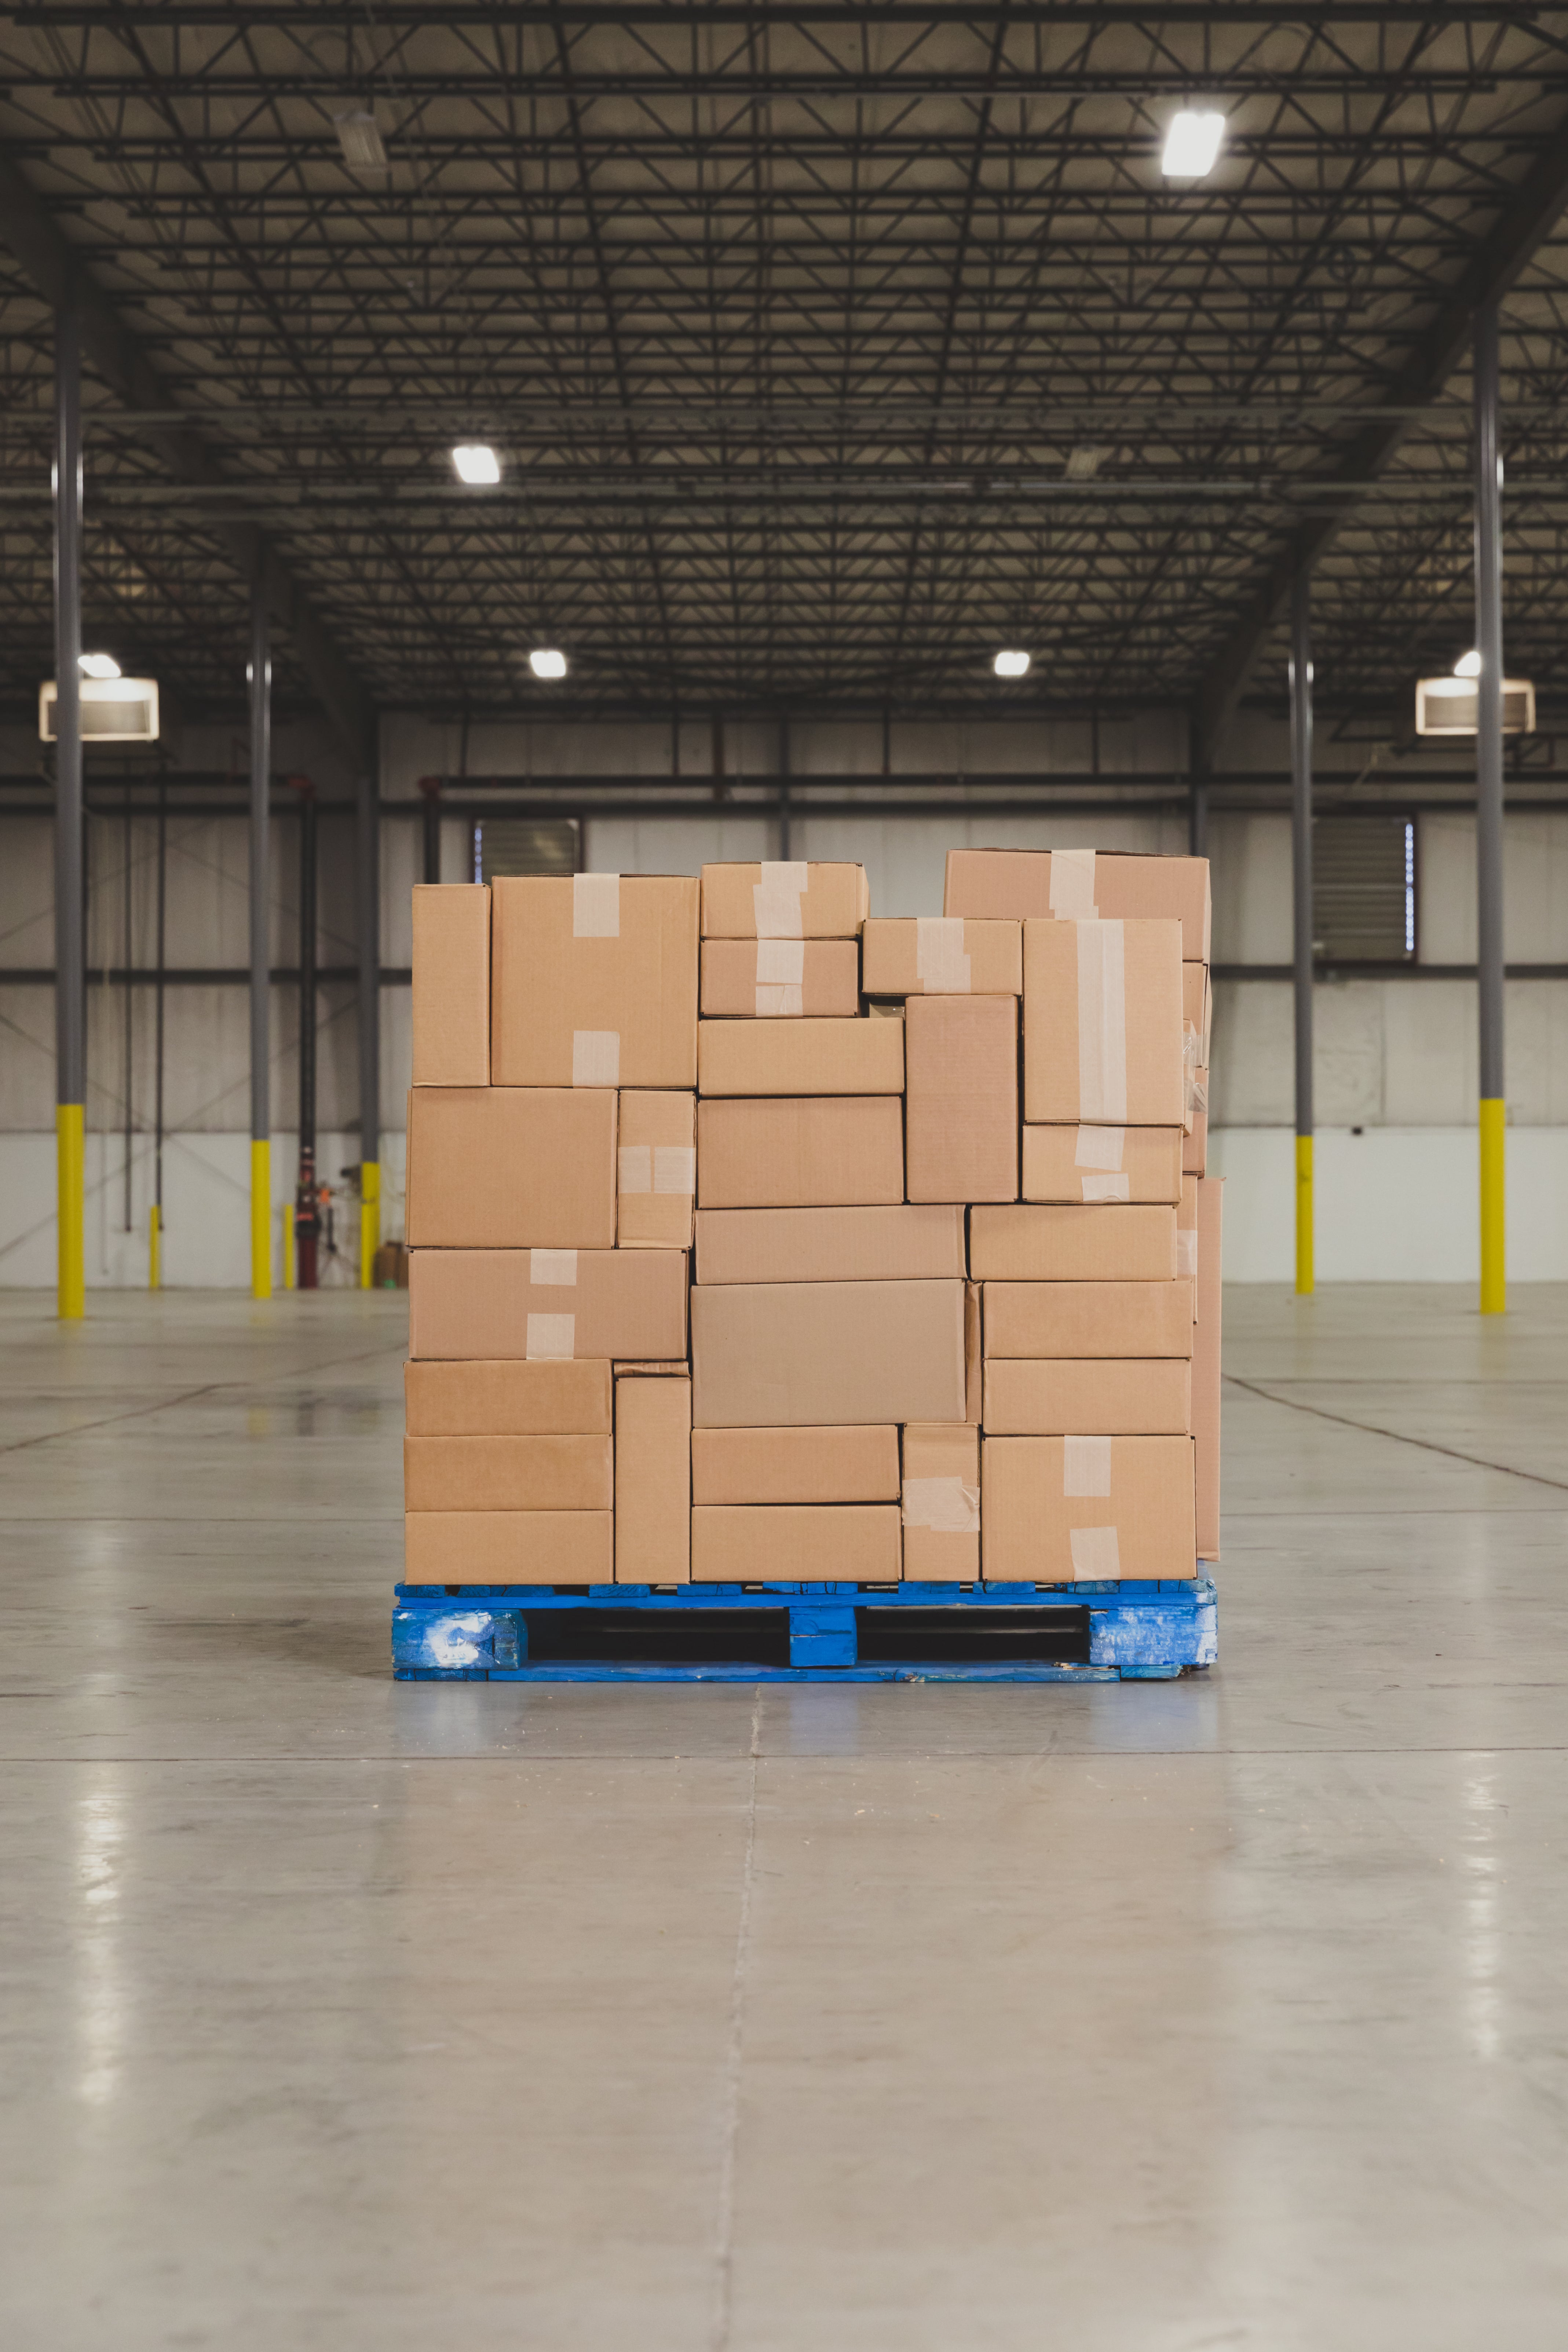 Paper Pallet Placed On Warehouse Stock Photo 1195457248